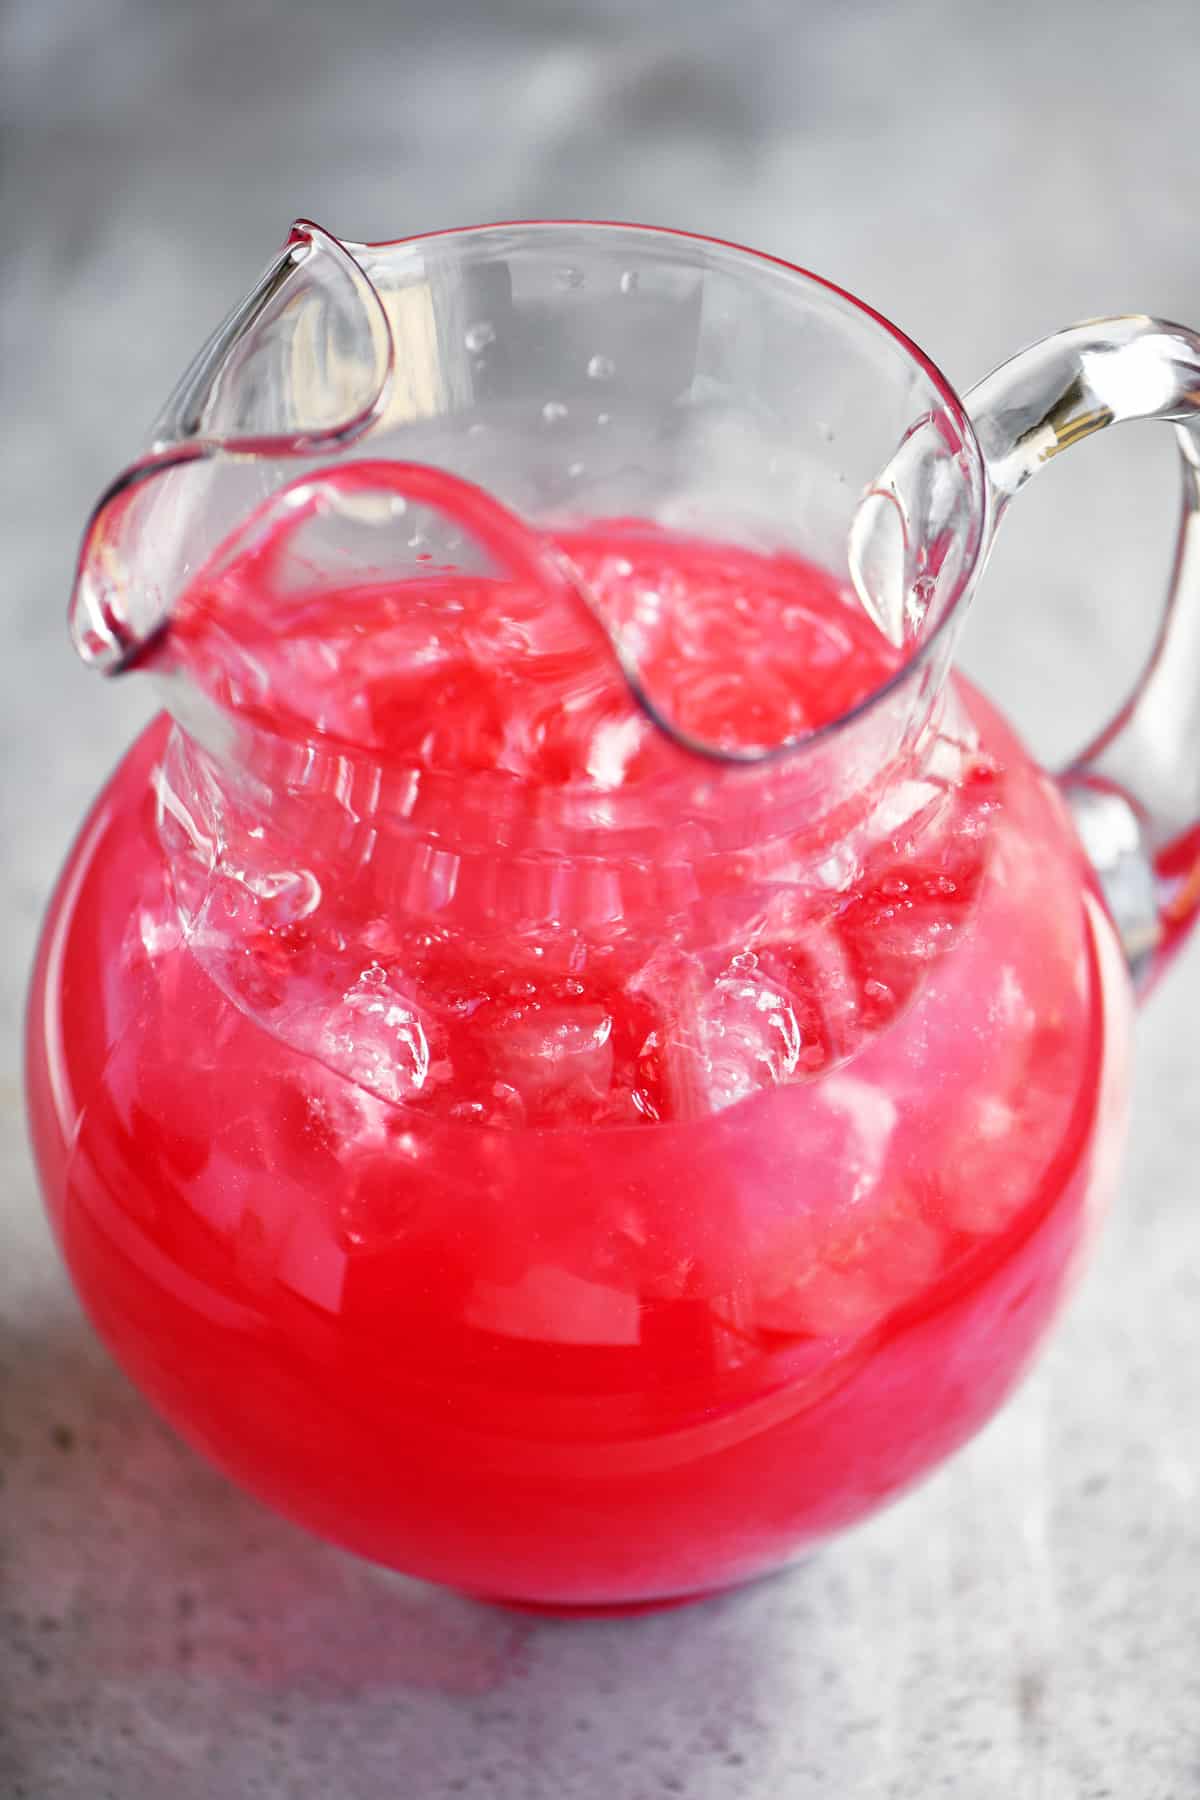 passion tea lemonade in a glass pitcher